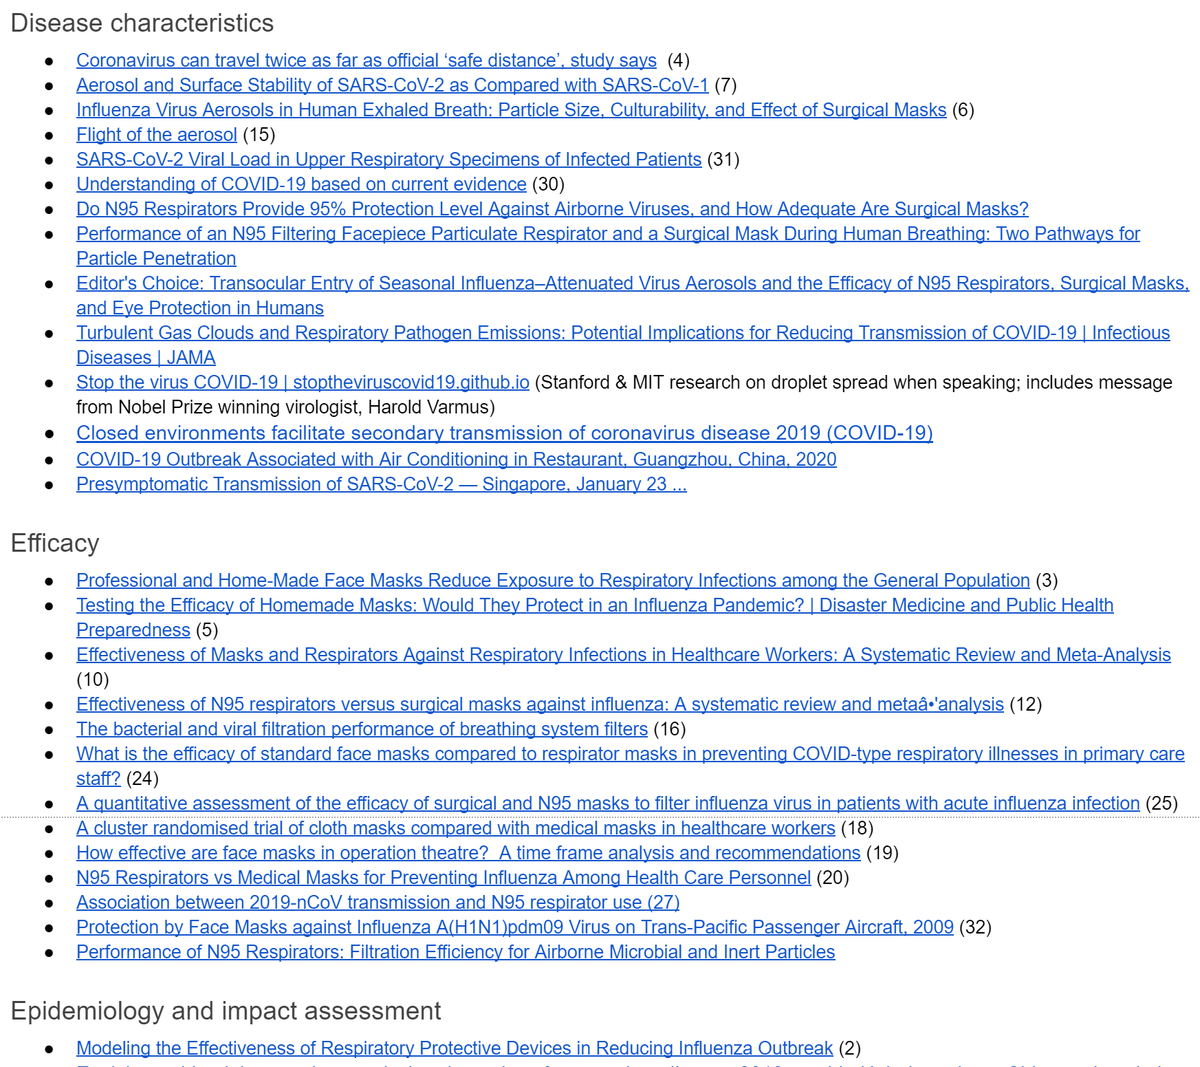 So that you don't have to, I've categorized 54 papers related to mask use into 6 categories, so you can find all the research you need for whatever you want to know. #Masks4All tiny.cc/maskswork